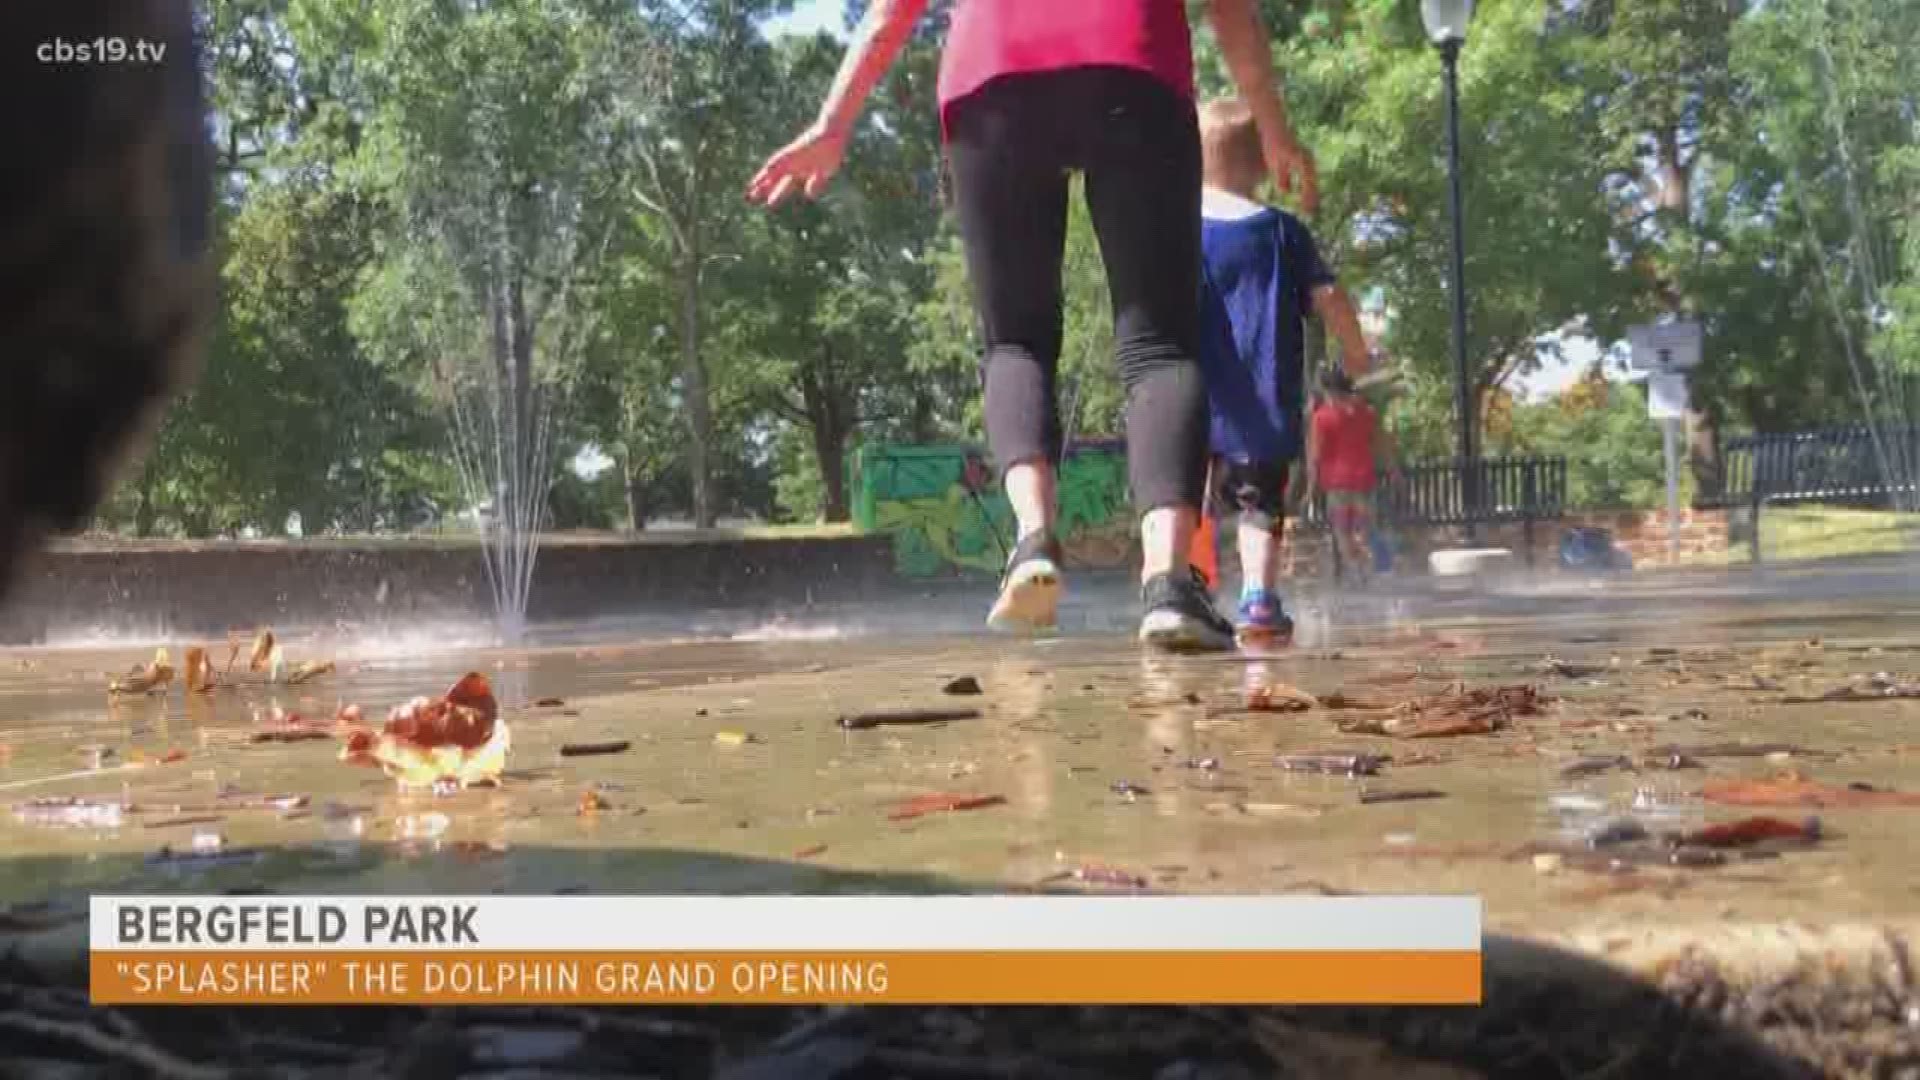 Splasher the Dolphin at Bergfeld Park went through some much needed renovations, fully funded by  Tyler residents.